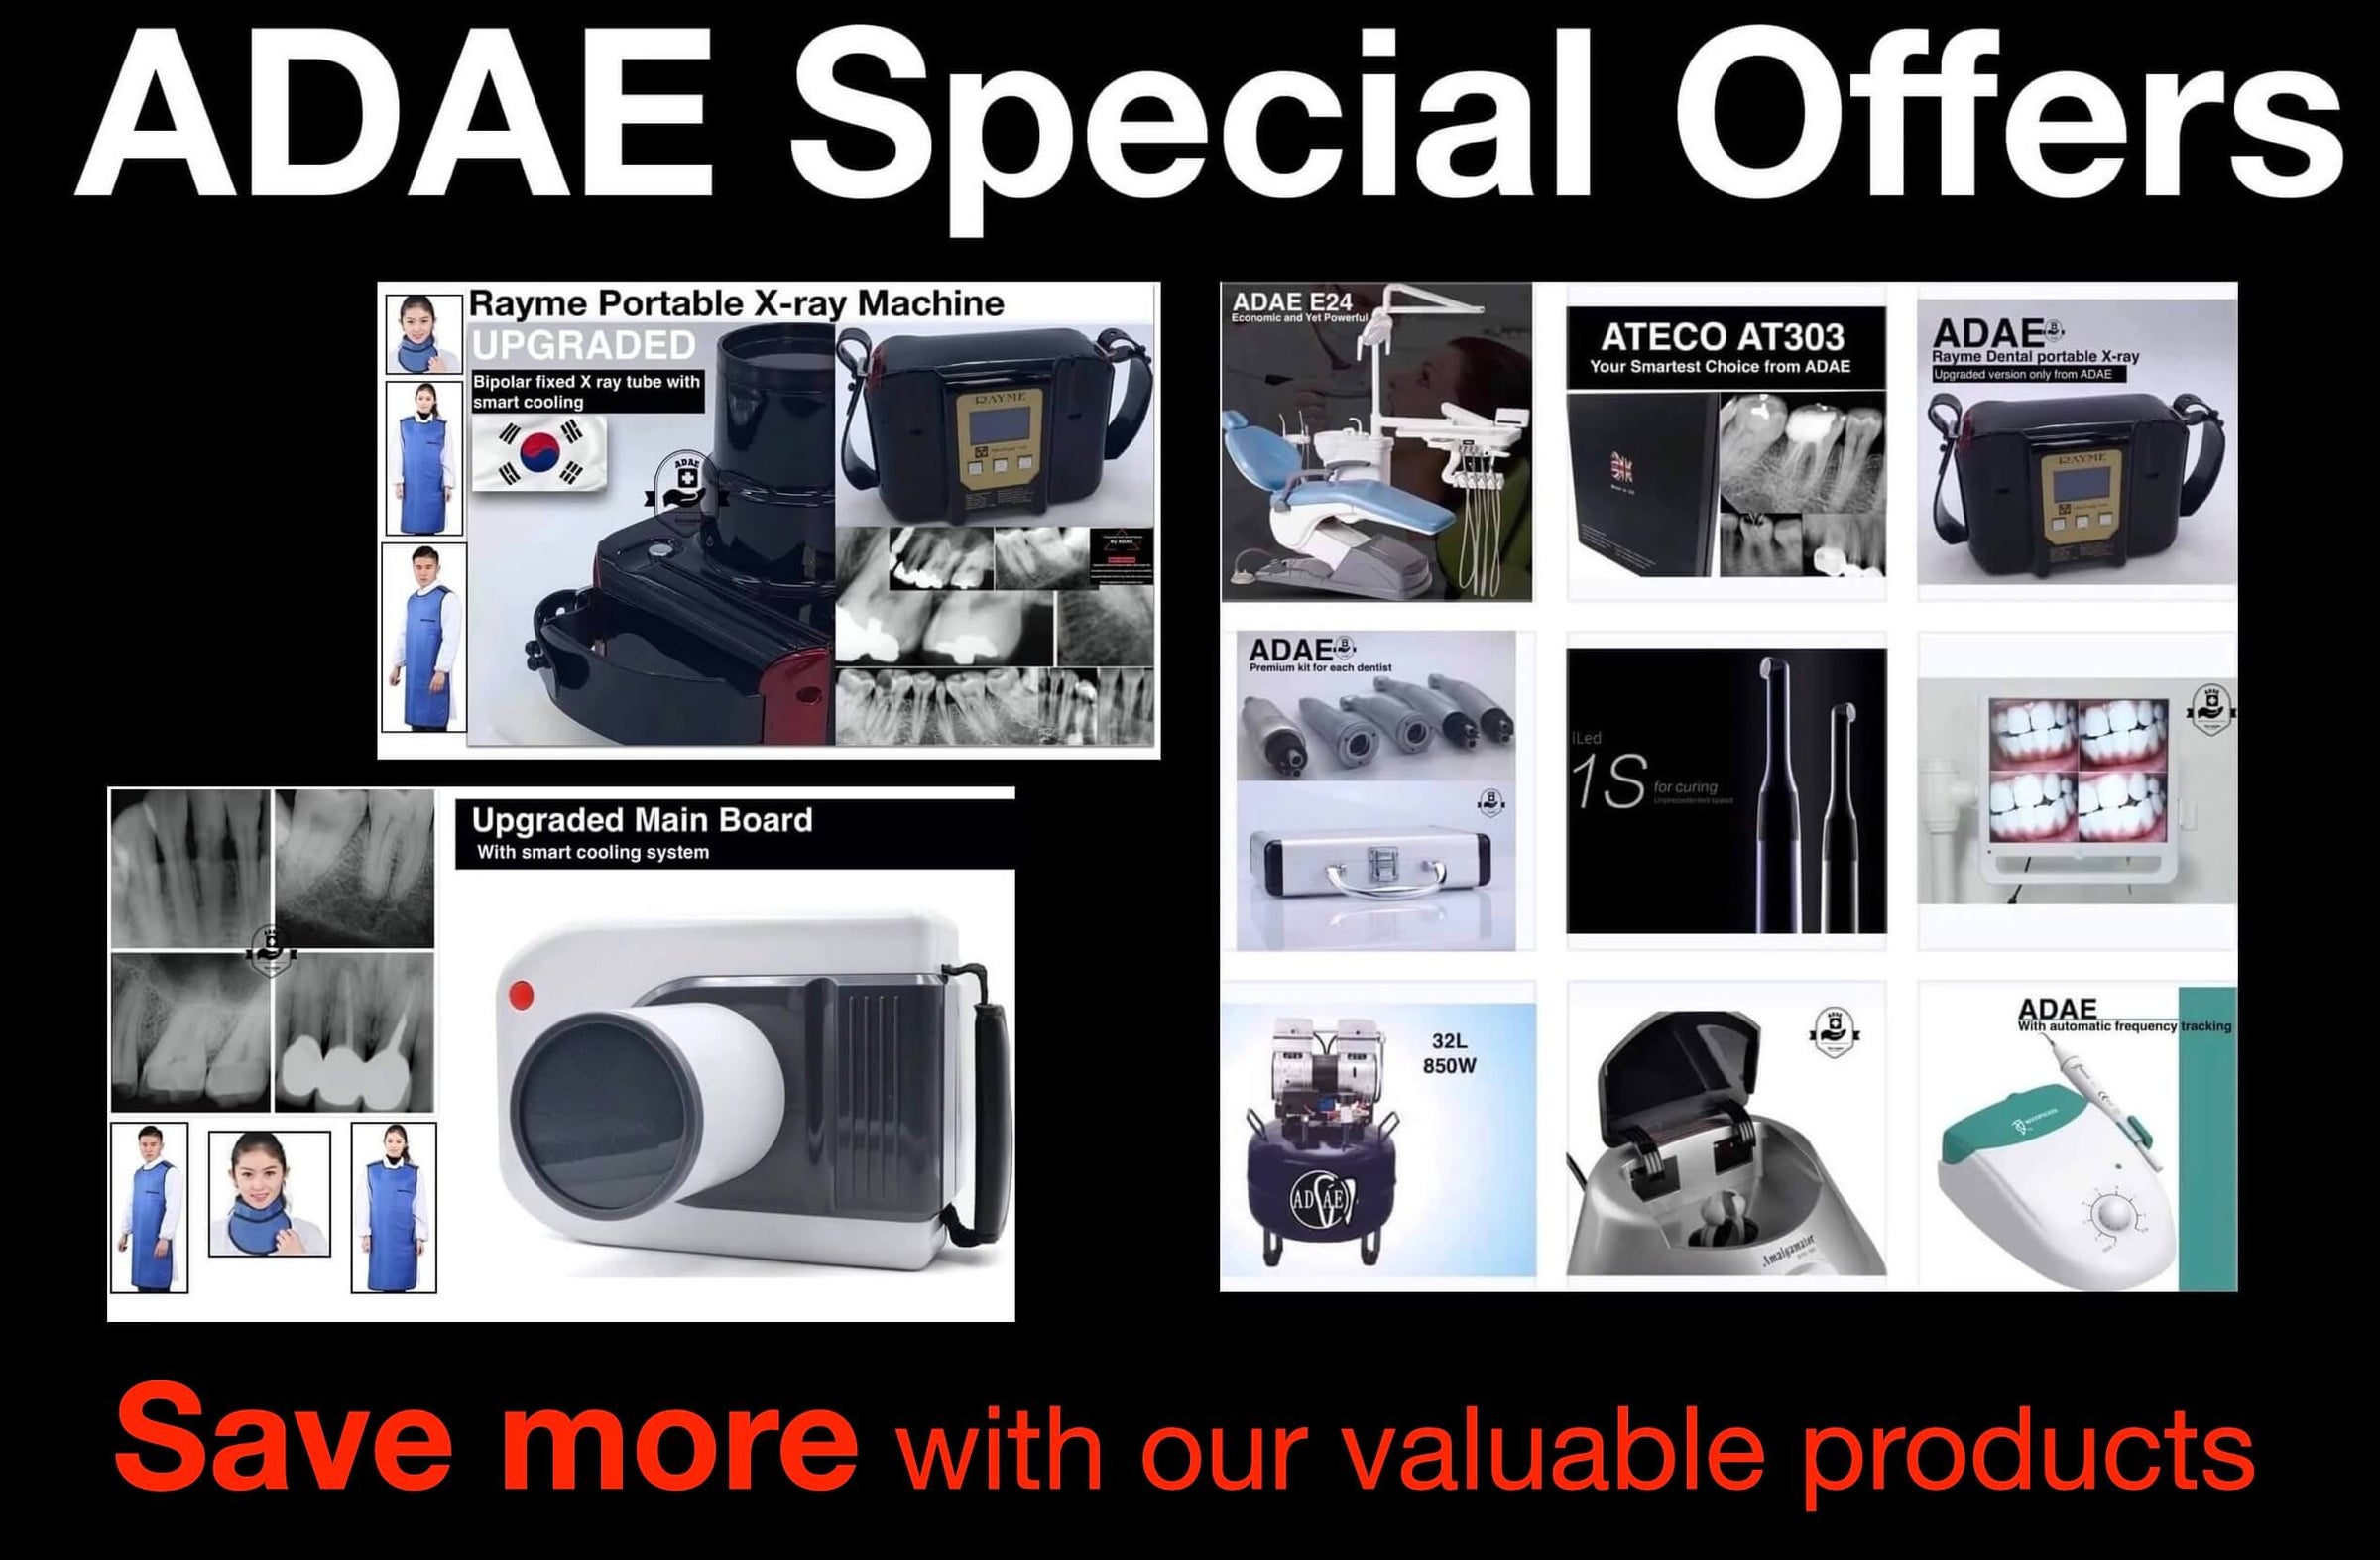 ADAE special offers and saving packages